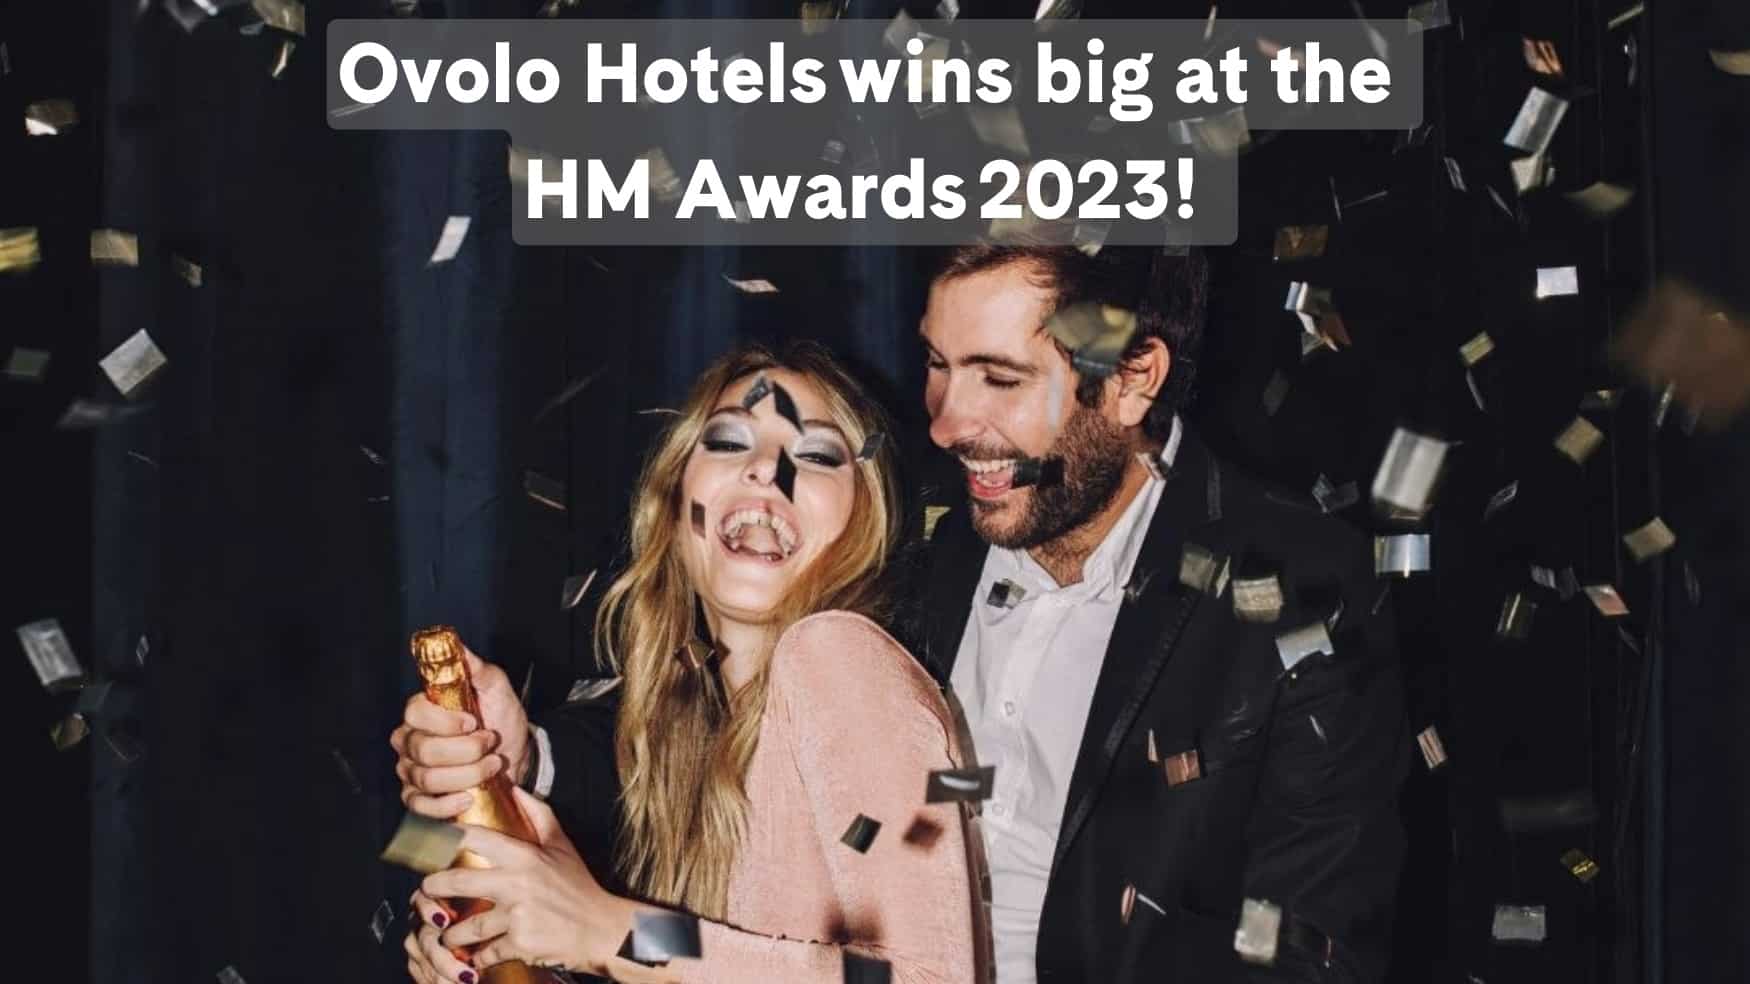 Ovolo Hotels wins big at the HM awards 2023